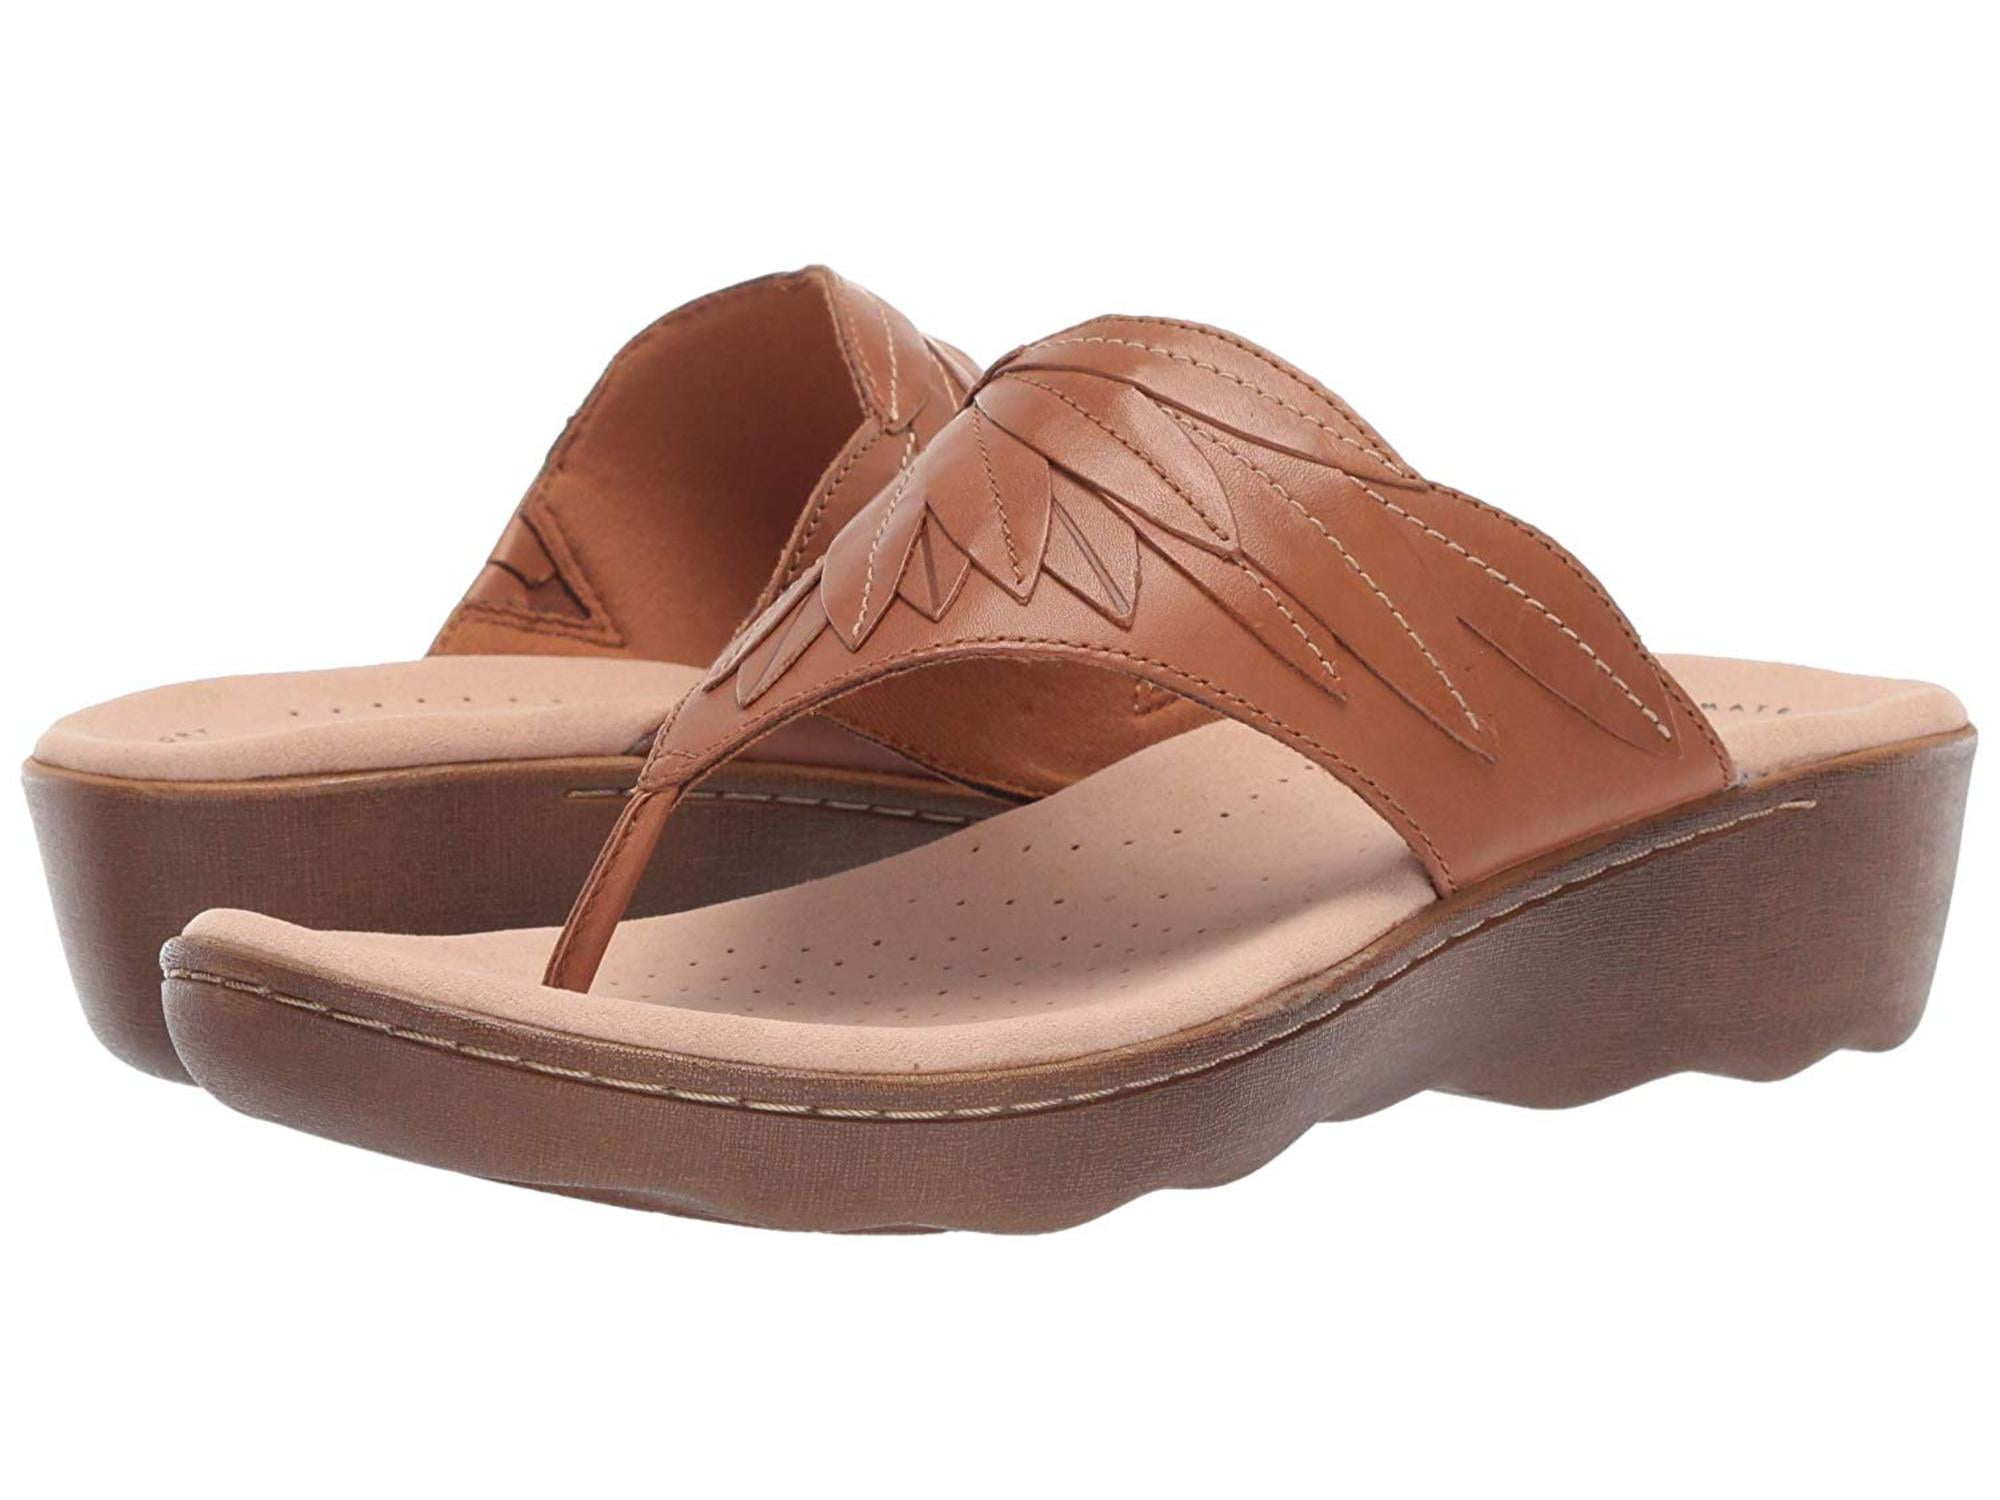 Clarks - CLARKS Women's, Phebe Pearl Thong Sandals., Tan Leather, Size ...